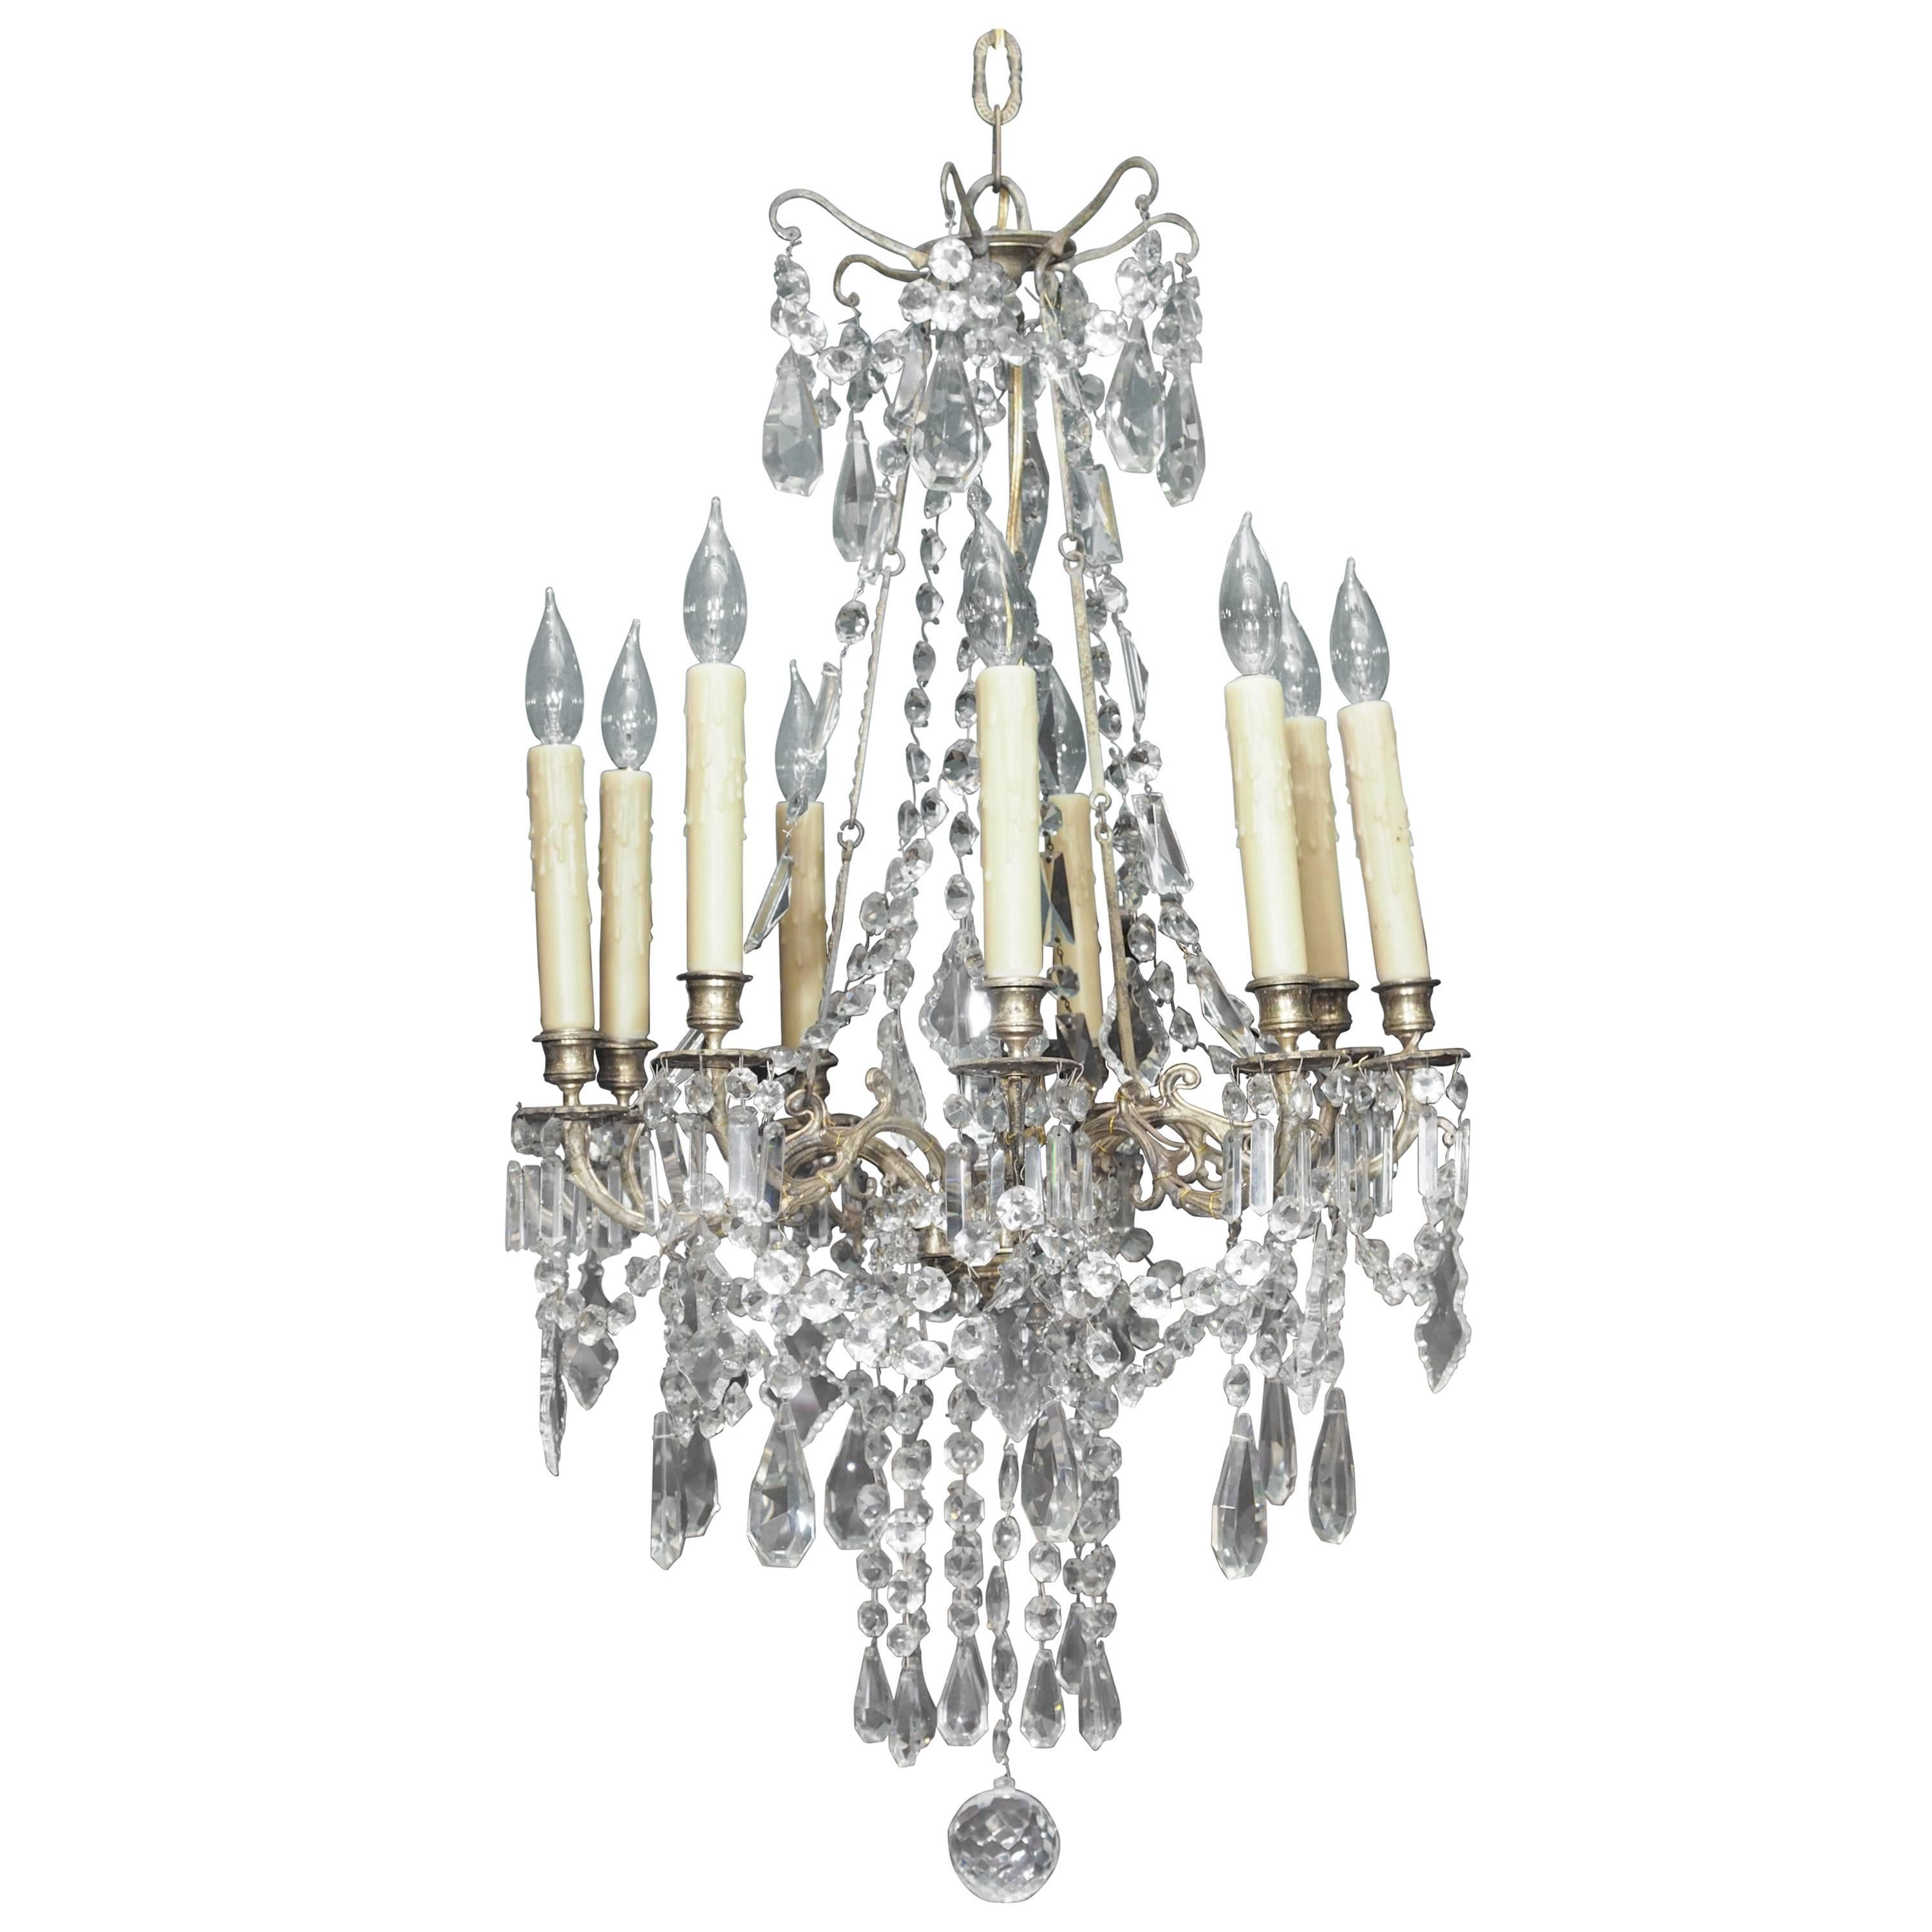 Small French Charles X Period Crystal Chandelier